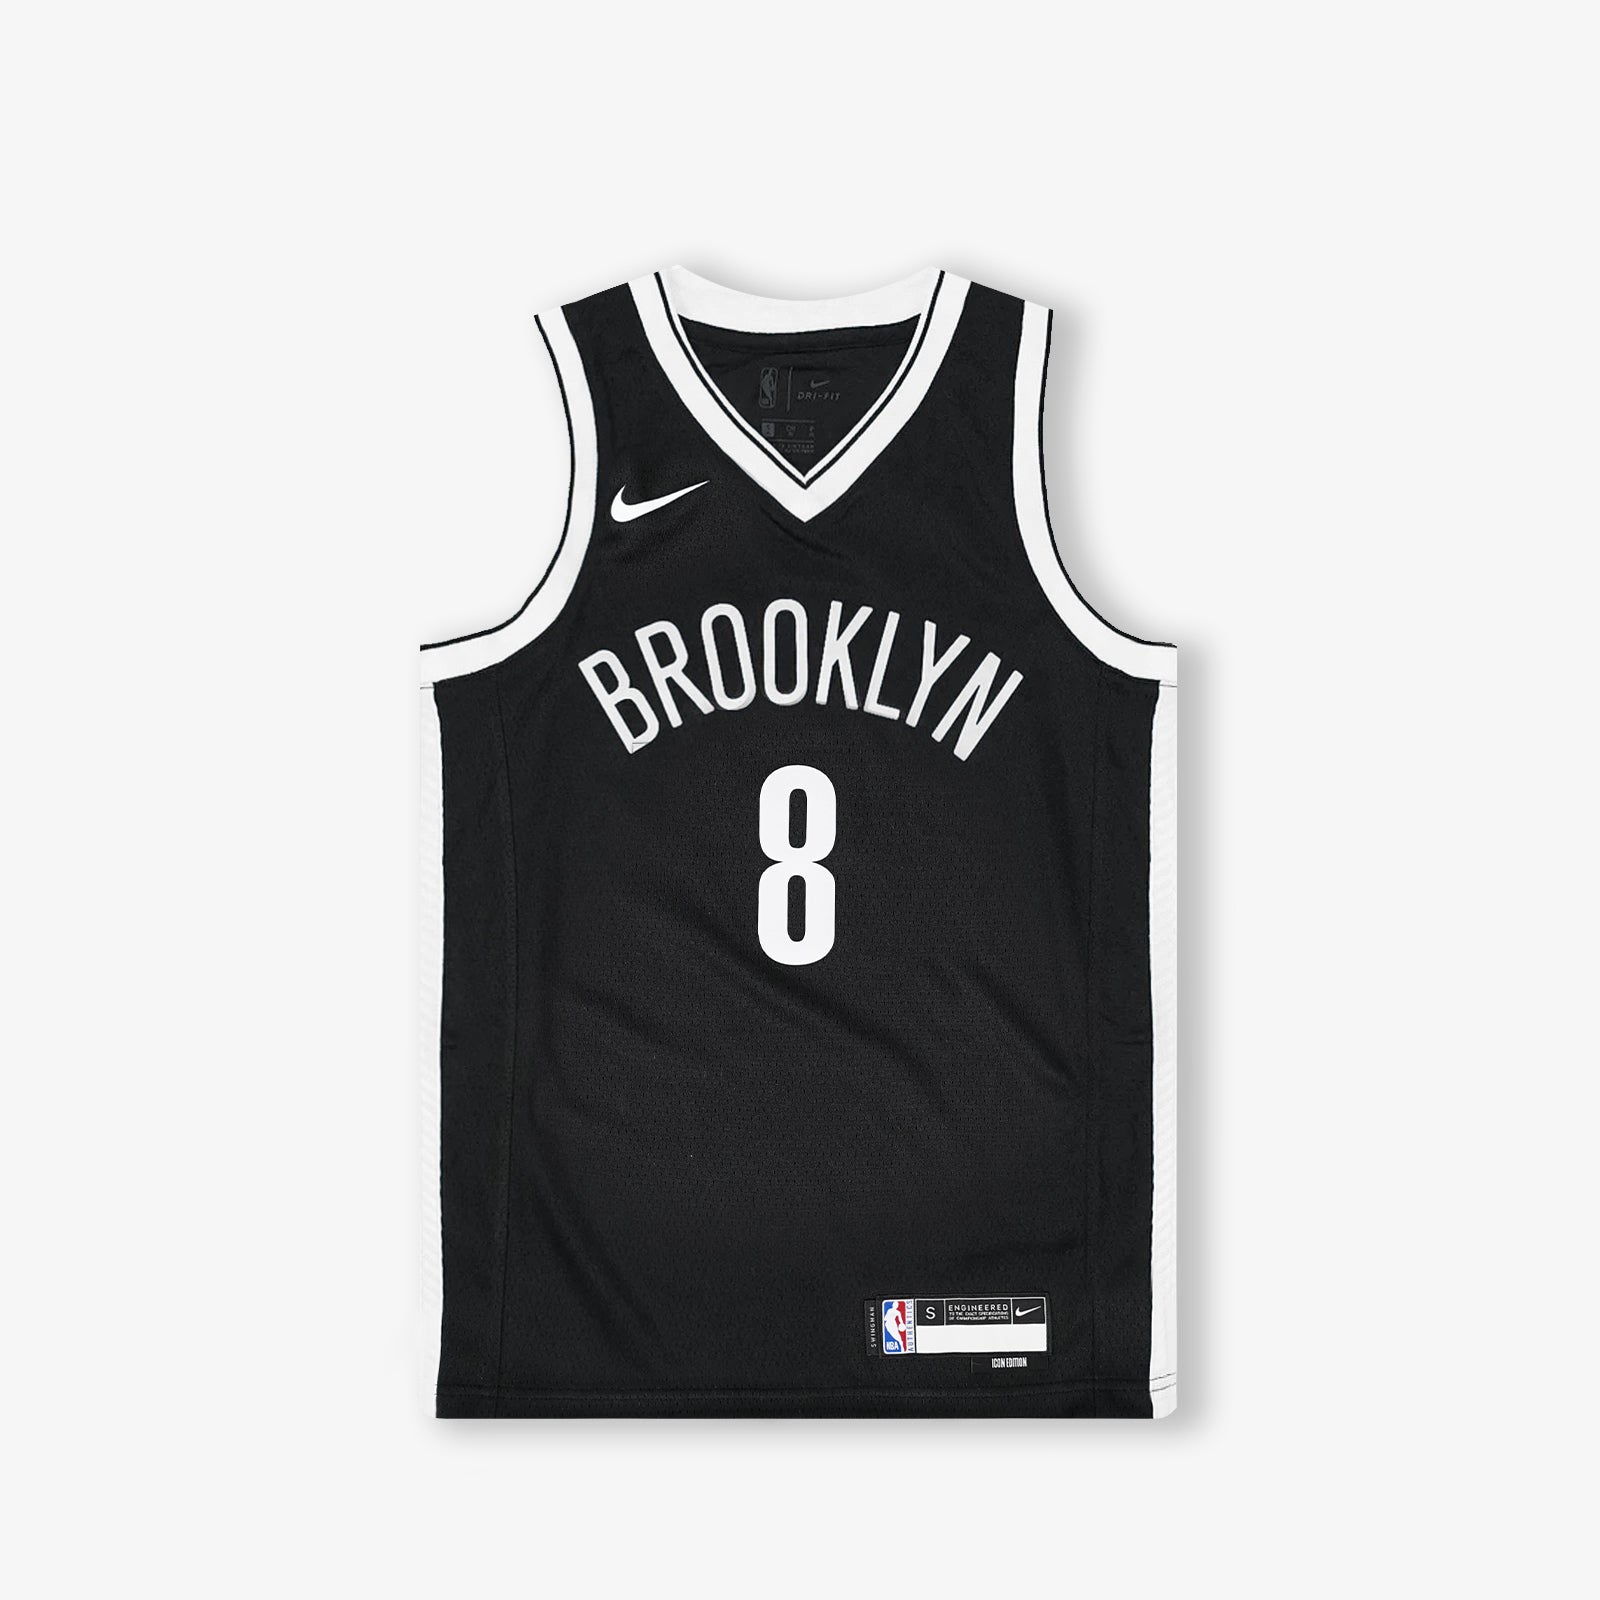 🏀 Patty Mills Brooklyn Nets Jersey Size Large – The Throwback Store 🏀